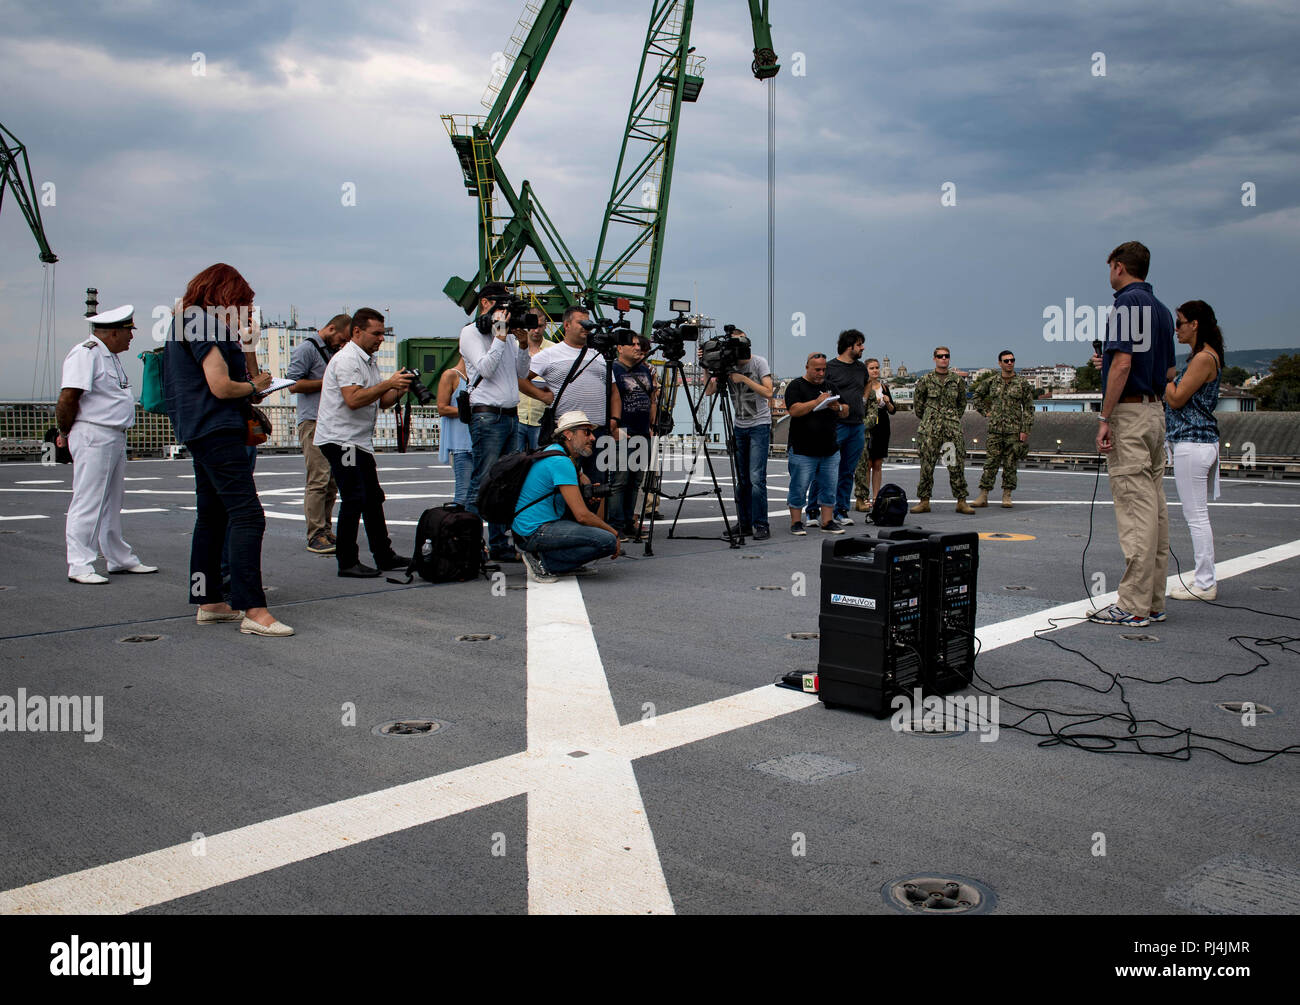 180828-N-RG482-169    VARNA, Bulgaria (Aug. 28, 2018) Civil service mariner Jonathan Keffer, second from right, civilian master of the Spearhead-class expeditionary fast transport ship USNS Carson City (T-EPF 7), speaks during a press event with Bulgarian media in Varna, Bulgaria, Aug. 28, 2018. Carson City is the seventh of nine expeditionary fast transport ships in Military Sealift Command's inventory with a primary mission of providing rapid transport of military equipment and personnel in theater via its 20,000 square foot reconfigurable mission bay area and seating for 312 passengers. (U. Stock Photo